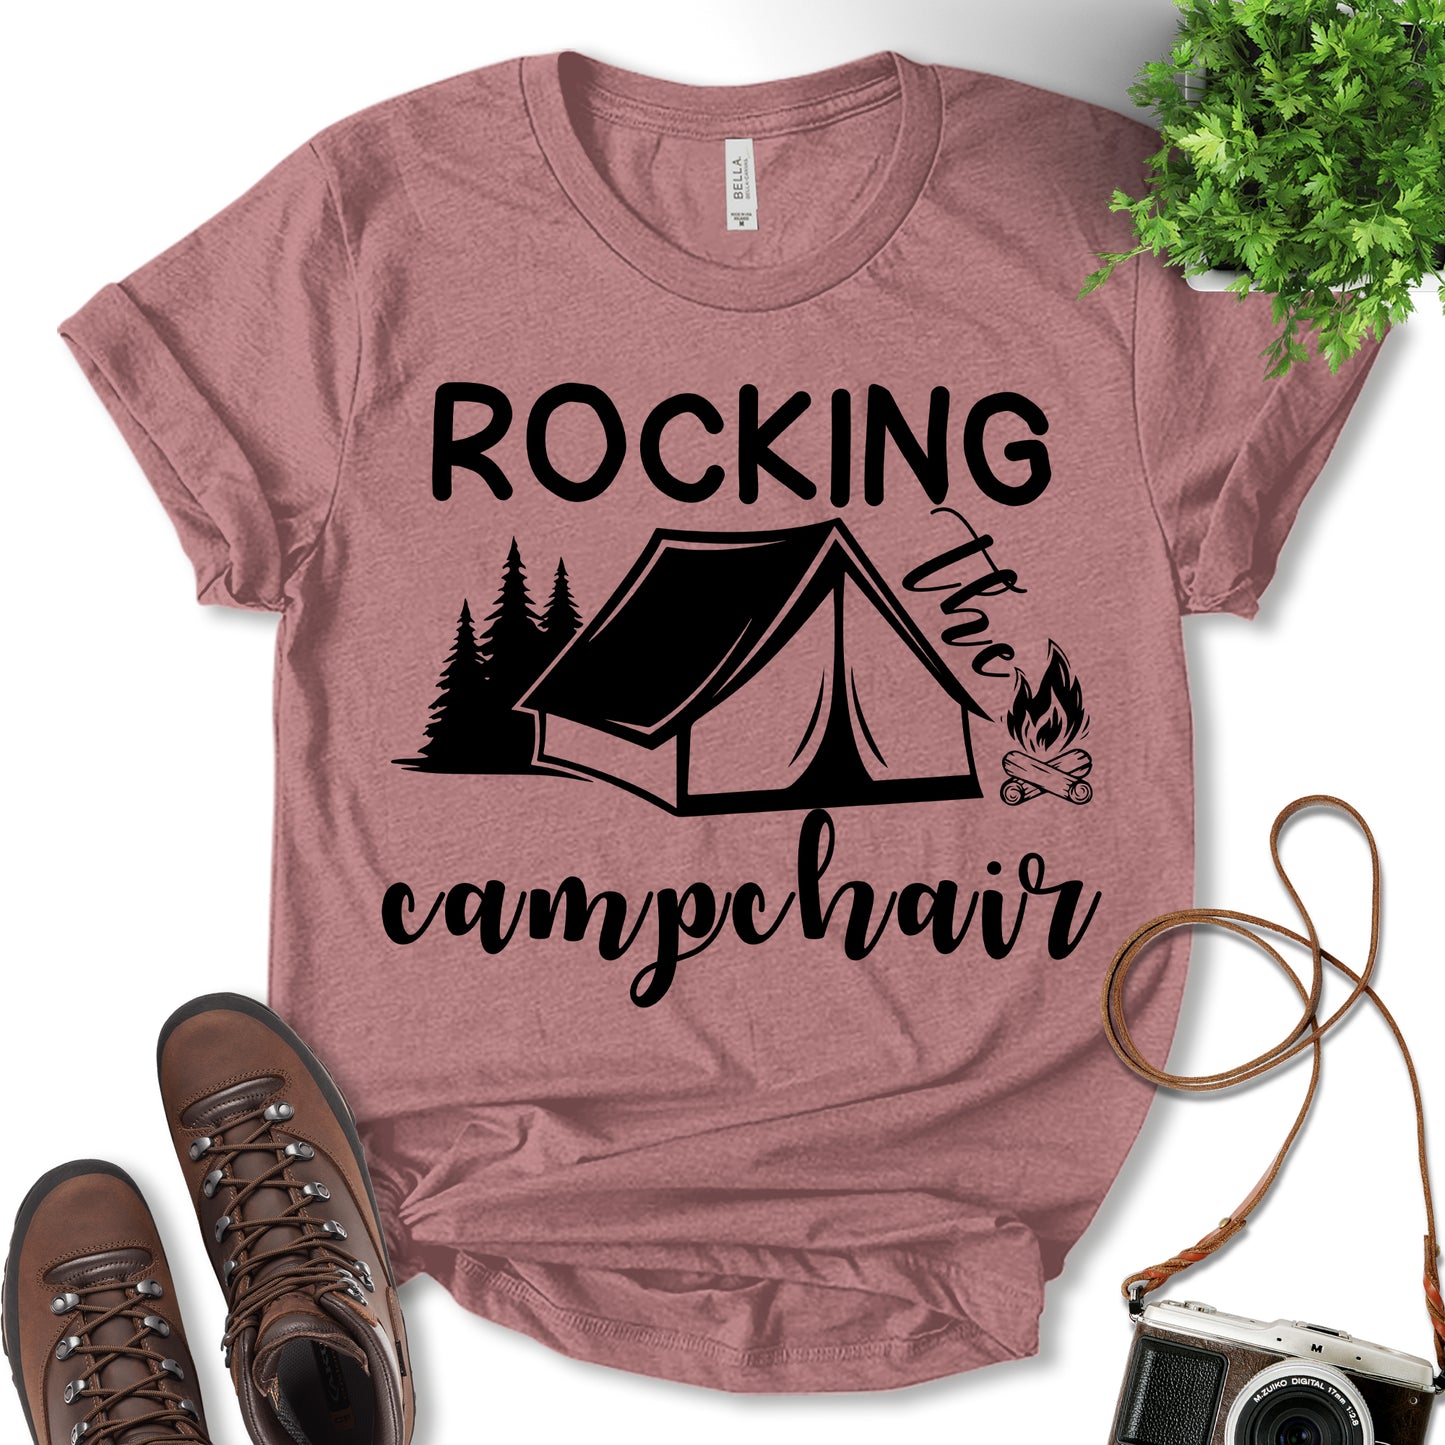 Rocking The Camp Chair Shirt, Funny Camping Shirt, Glamping Shirt, Fun Travel Shirt, Nature Lover, Adventure Lover, Camp Lovers Gift, Unisex T-Shirt